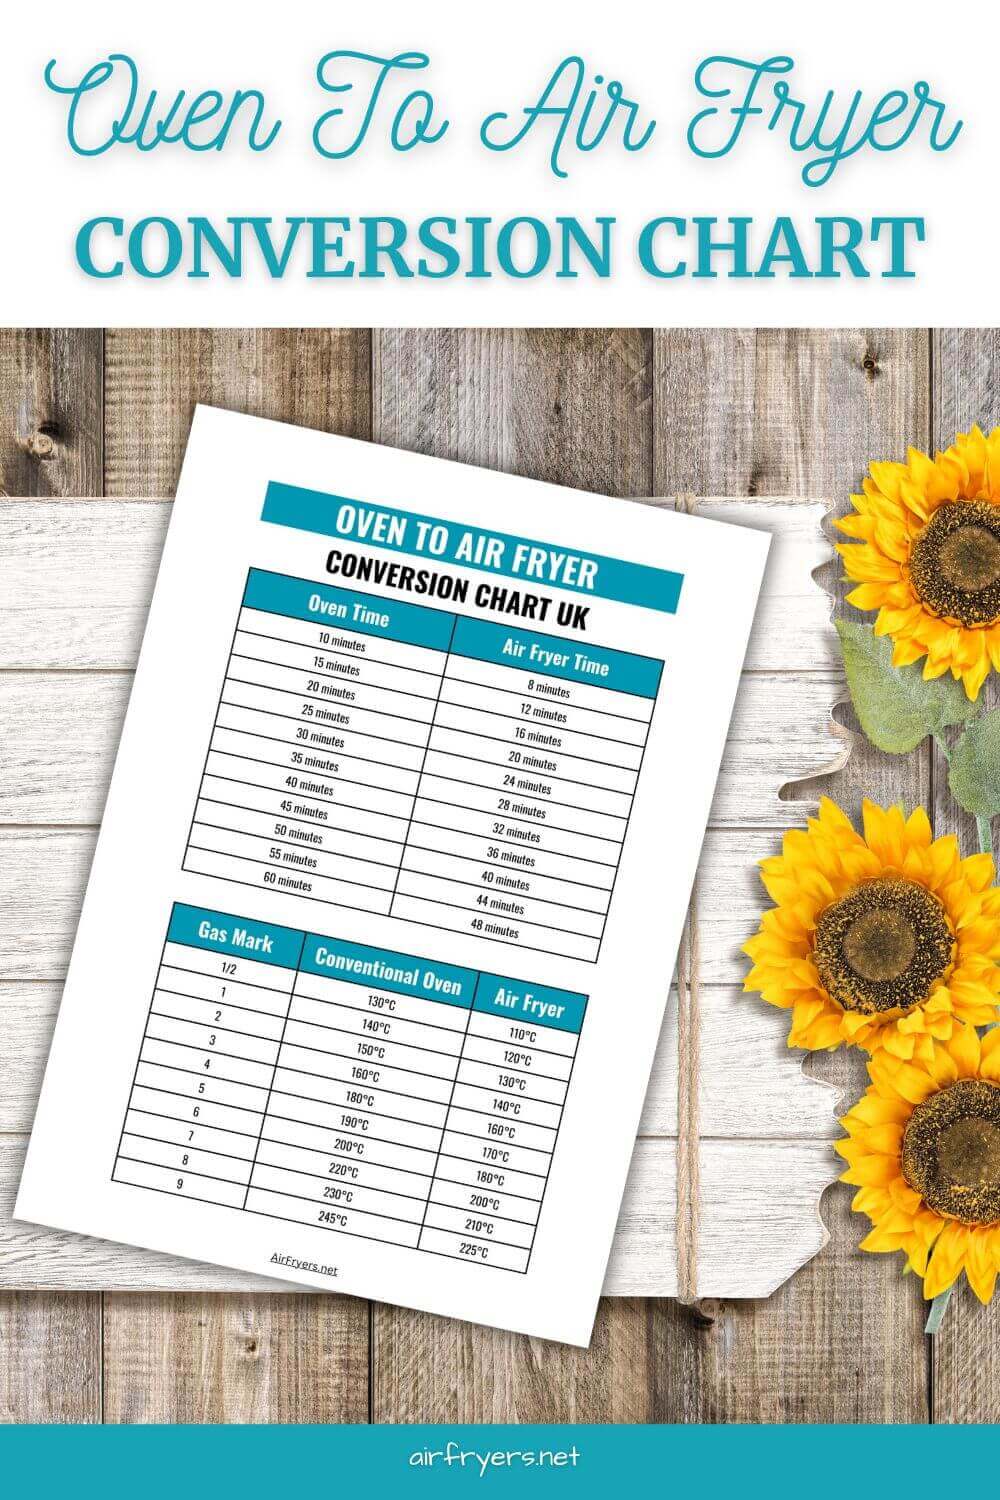 Oven To Air Fryer Conversion Chart UK 